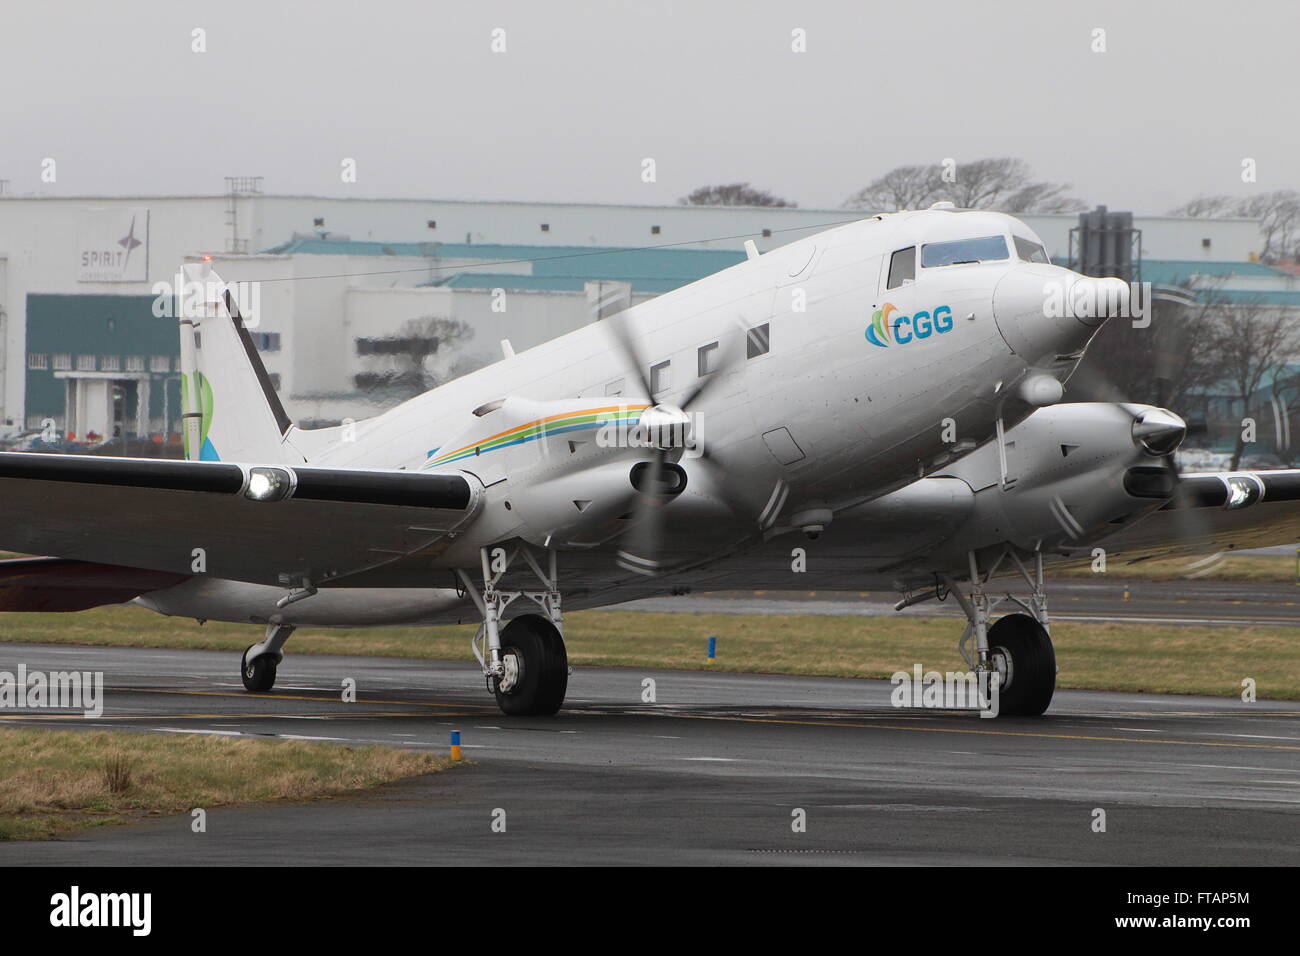 C-GGSU, a Basler BT-67 (a converted Douglas DC-3/C-47) operated by CGG Aviation, at Prestwick International Airport. Stock Photo